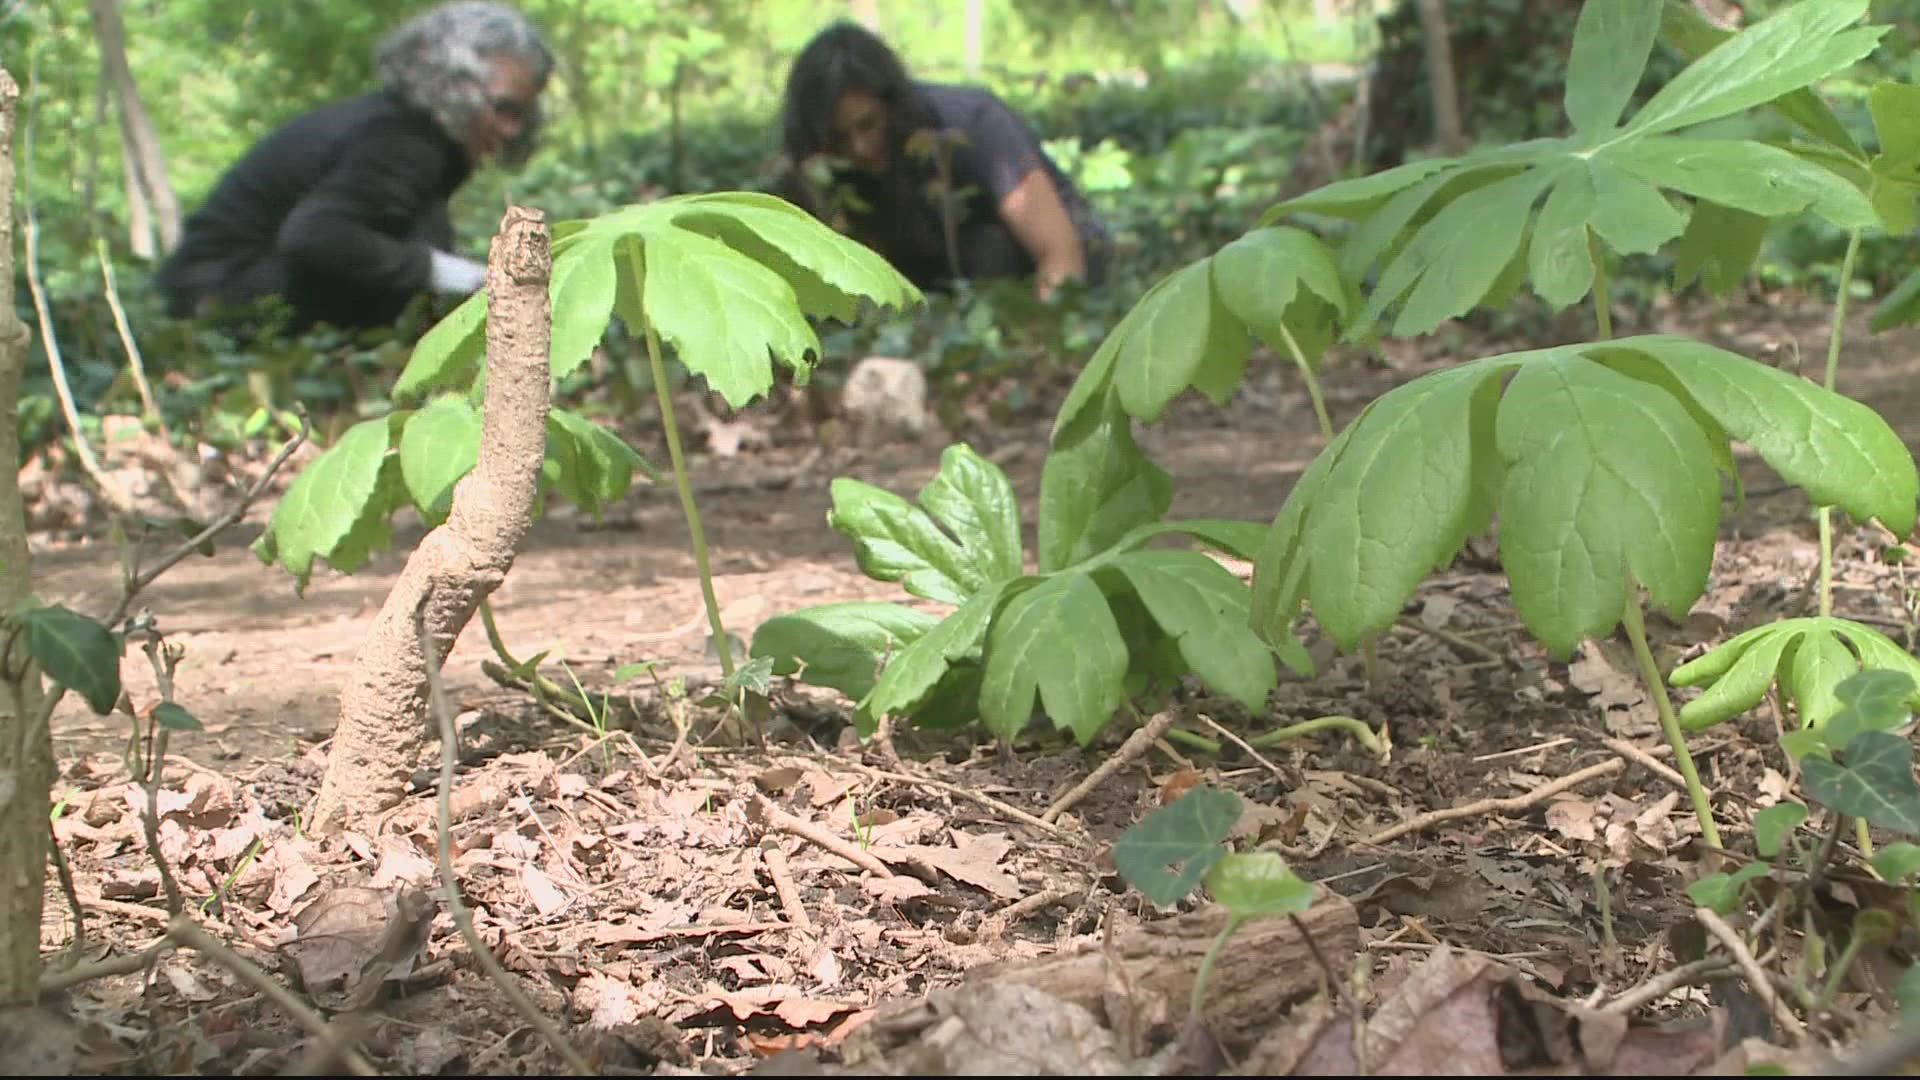 Volunteers from Rock Creek Conservancy are pulling out an invasive species strangling native plants in the park.